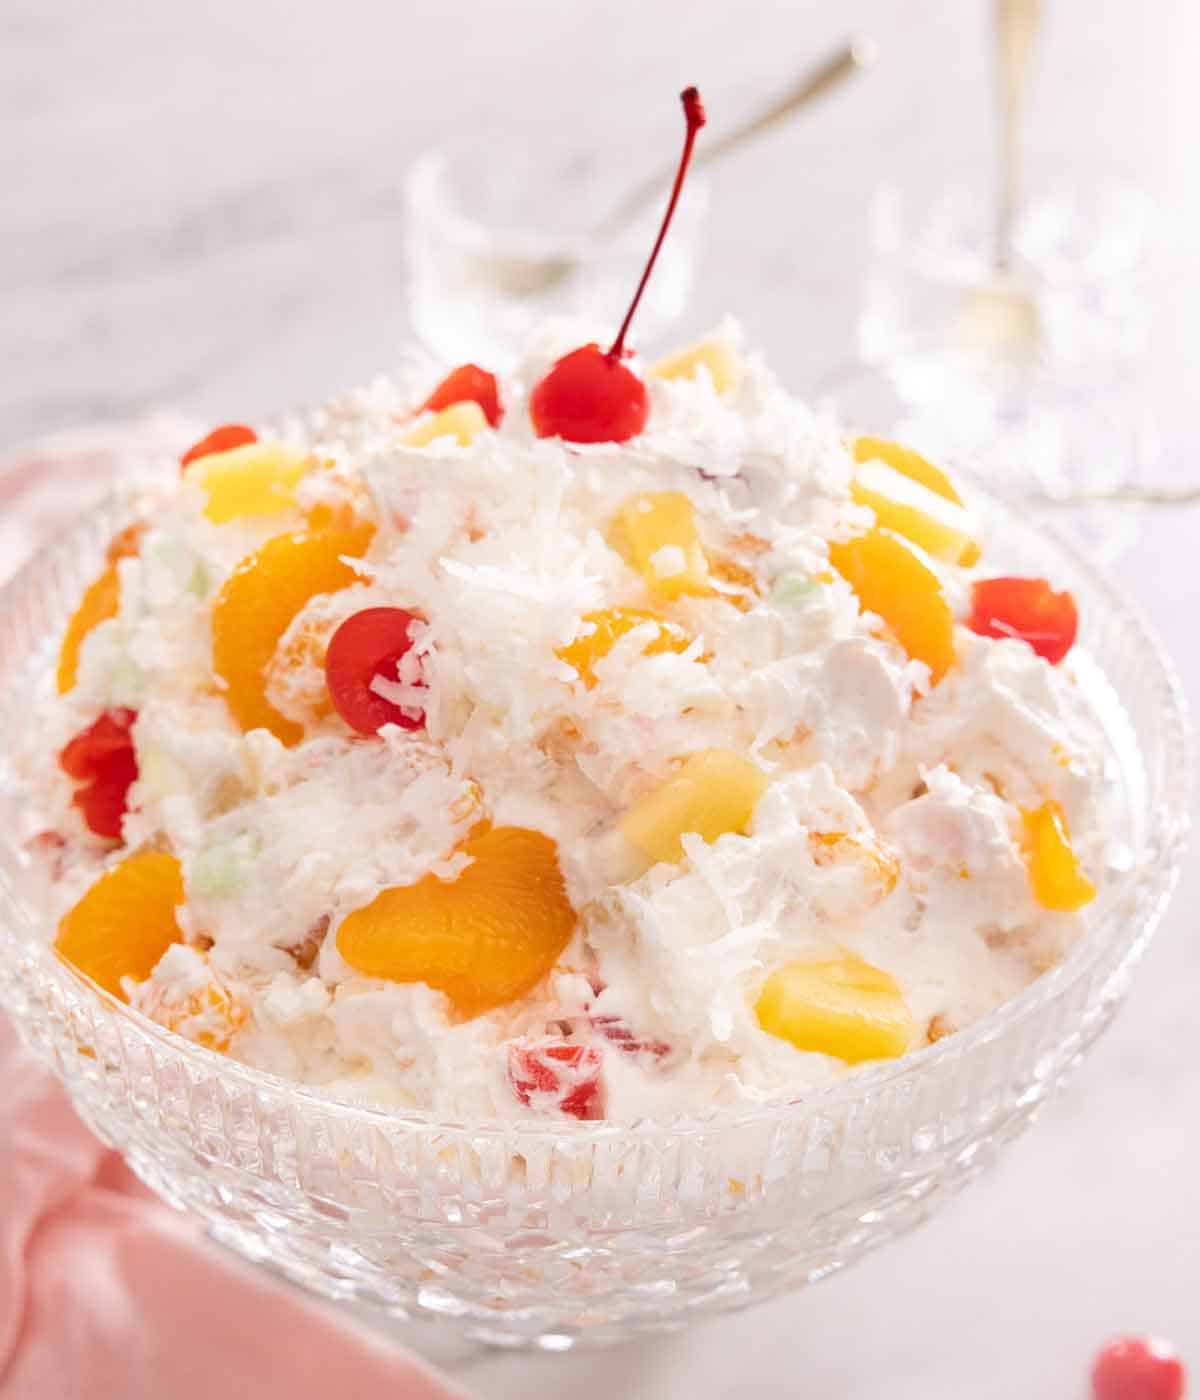 A serving bowl of ambrosia salad with fruit, coconut flakes, and whipped cream dressing.